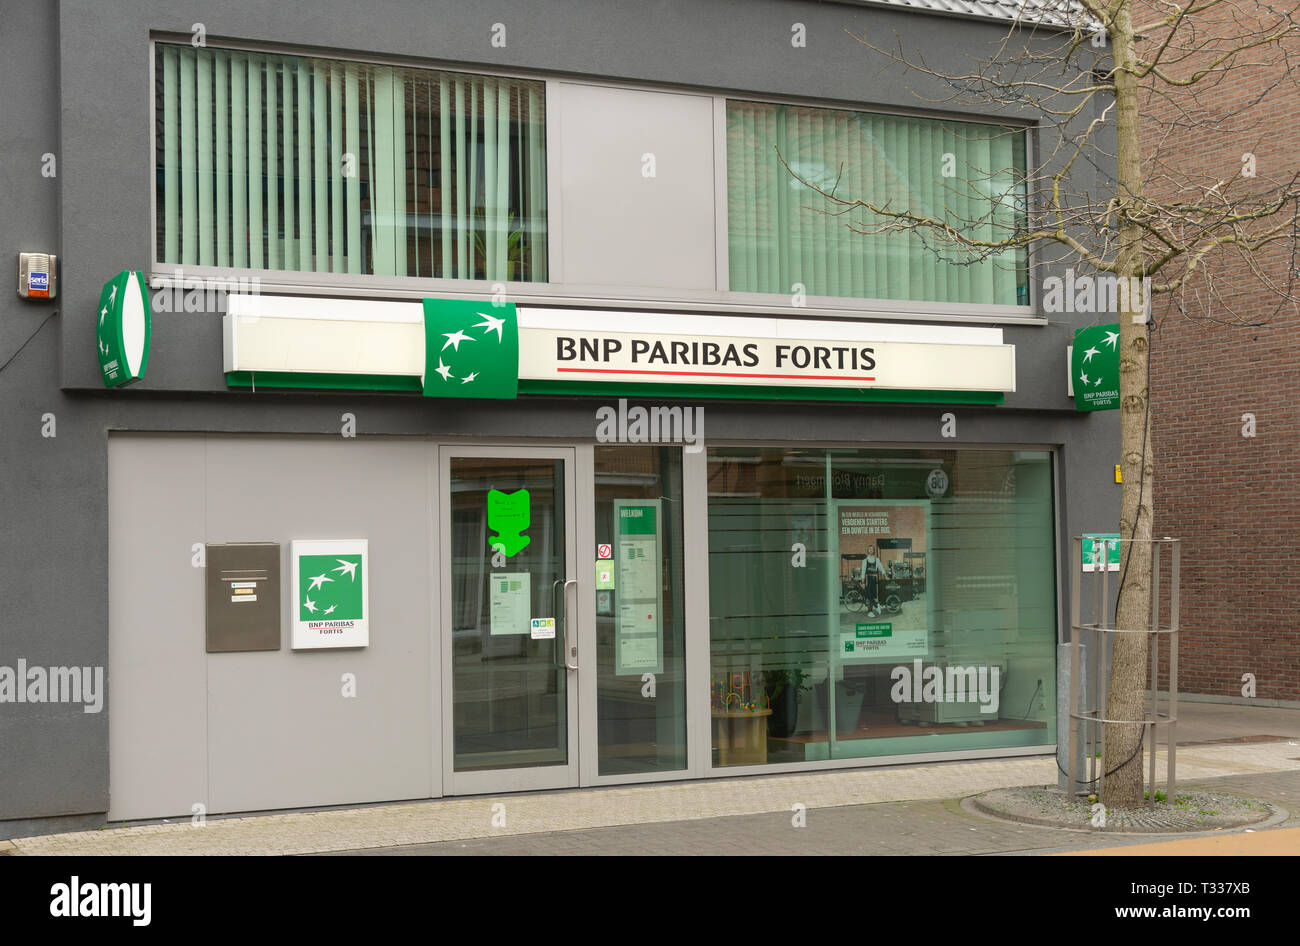 Sint Gillis Waas, Belgium-March 20, 2019, the front of a BNP Paribas Fortis Office in the village of Sint Gillis Waas in Belgium Stock Photo